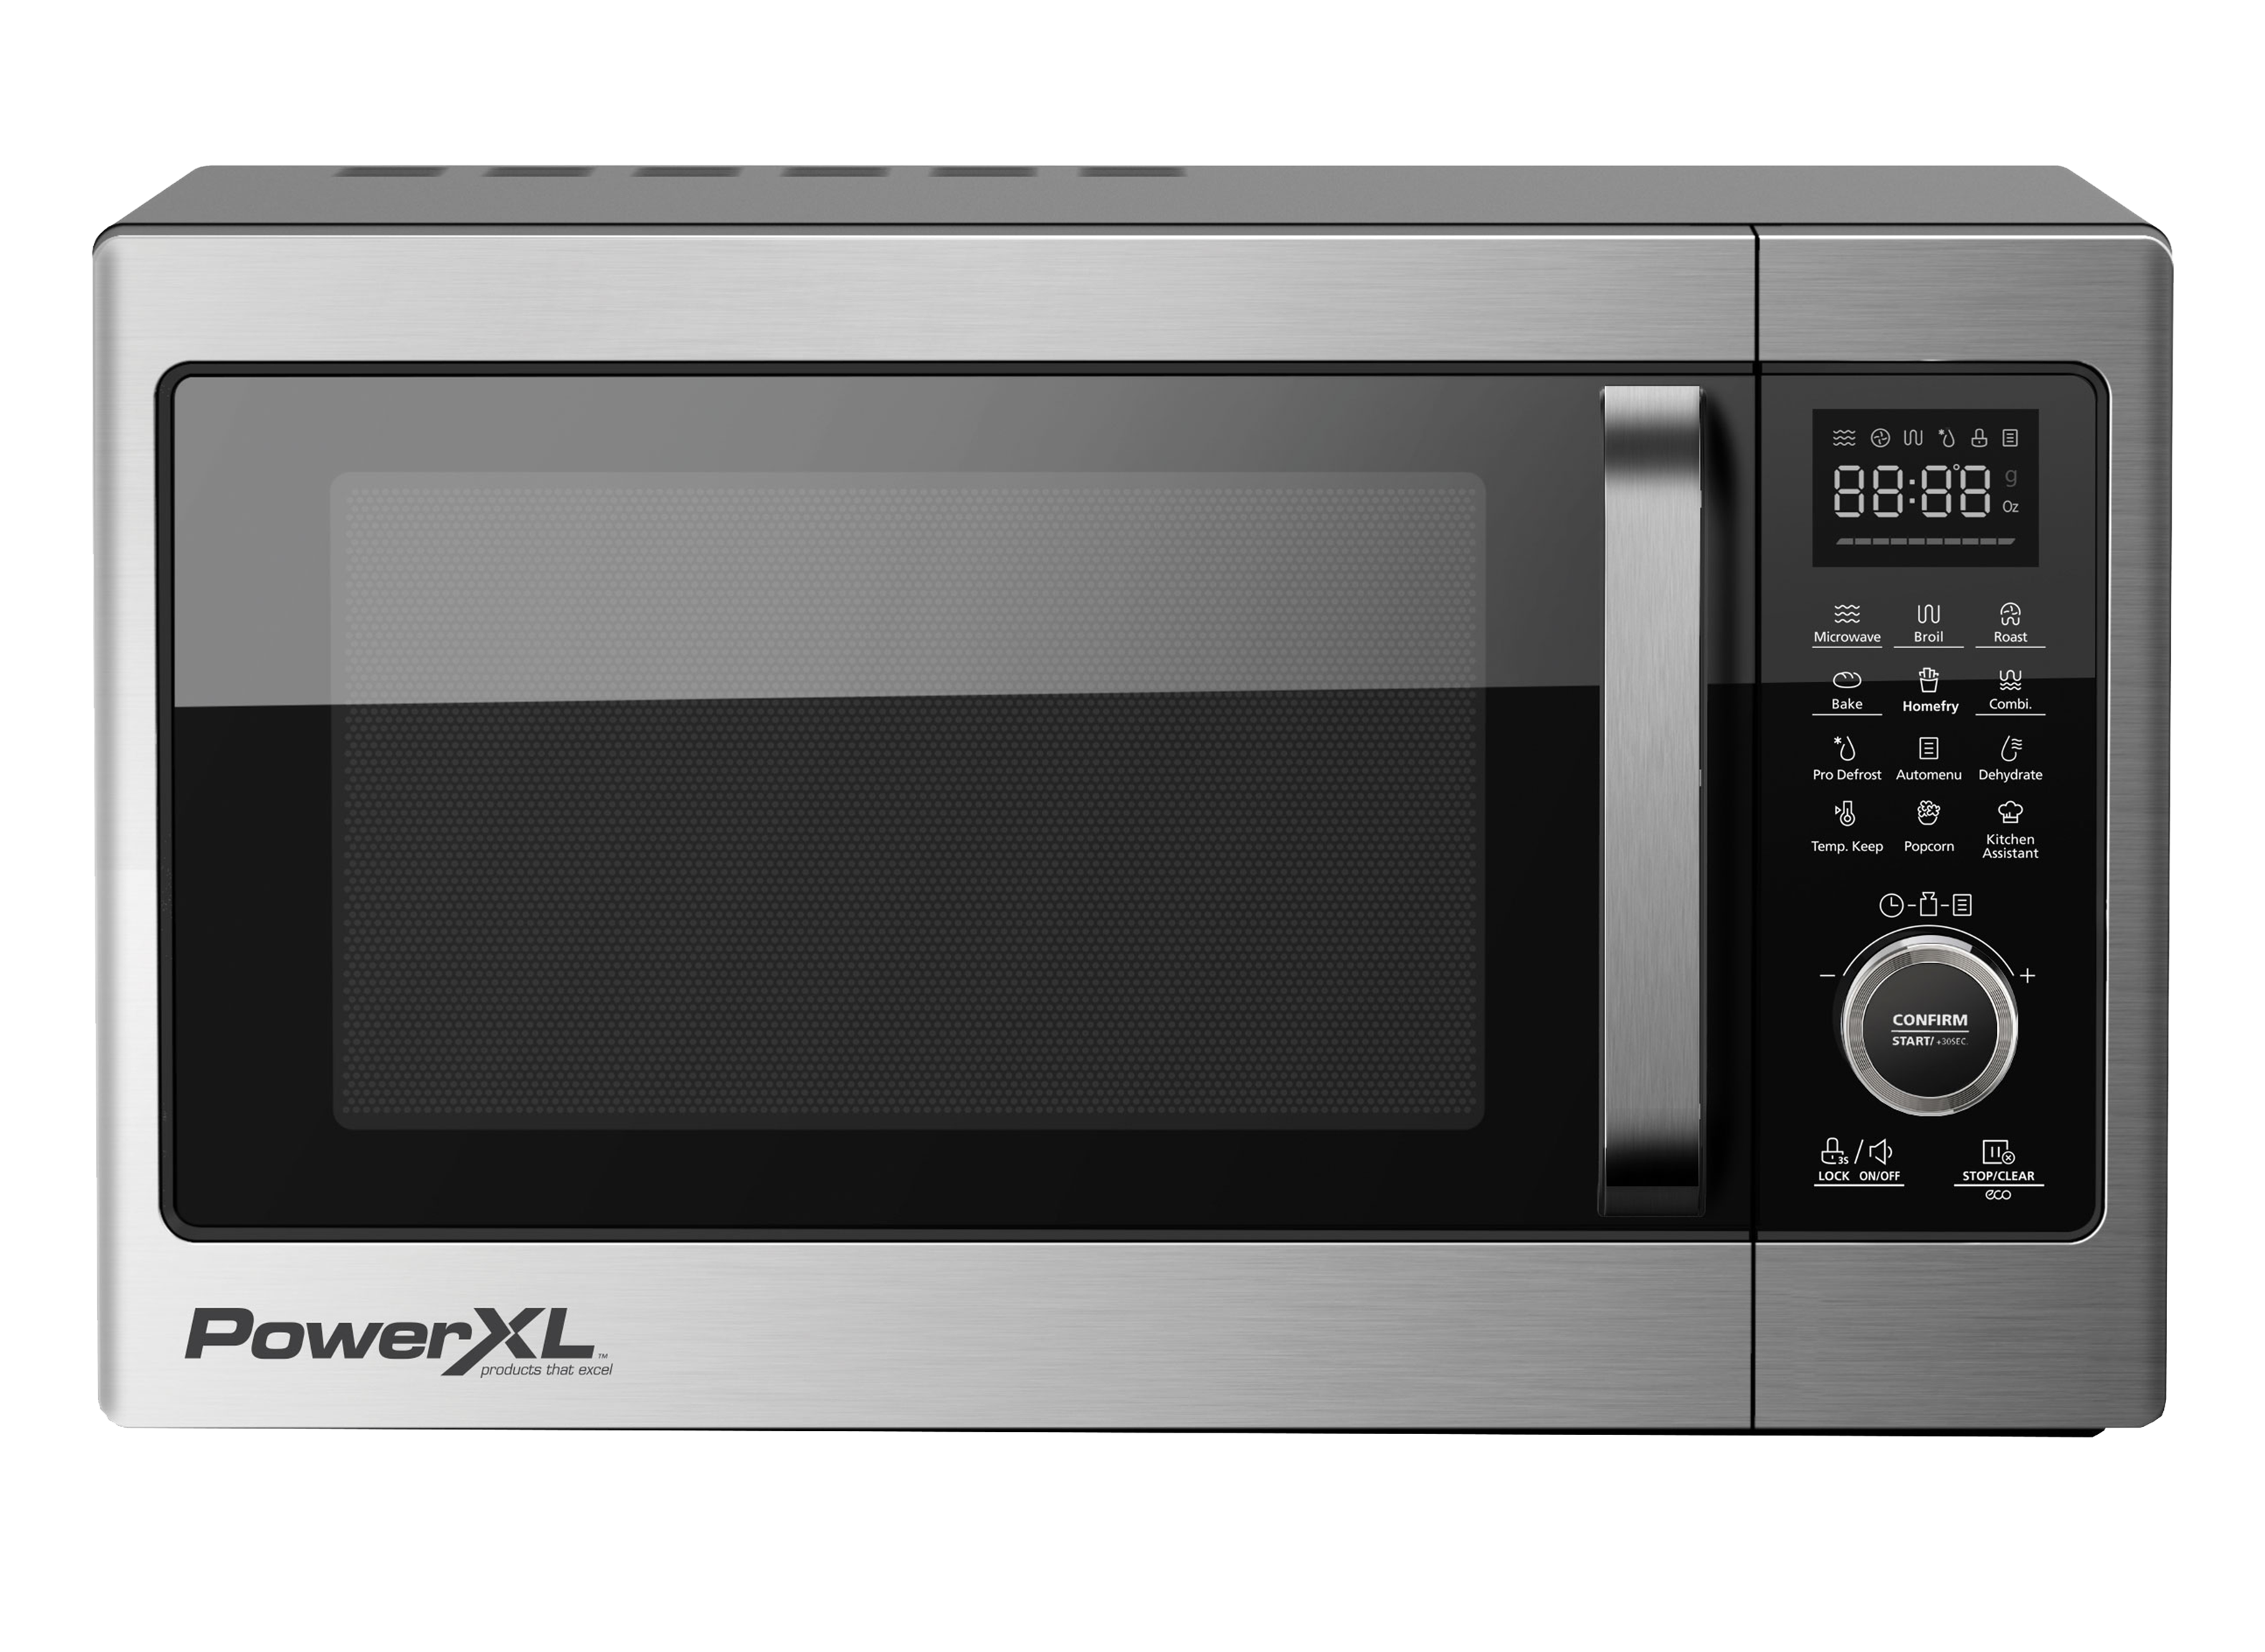 https://crdms.images.consumerreports.org/prod/products/cr/models/402664-midsized-countertop-microwaves-power-xl-microwave-air-fryer-plus-00752356830953-10016888.png